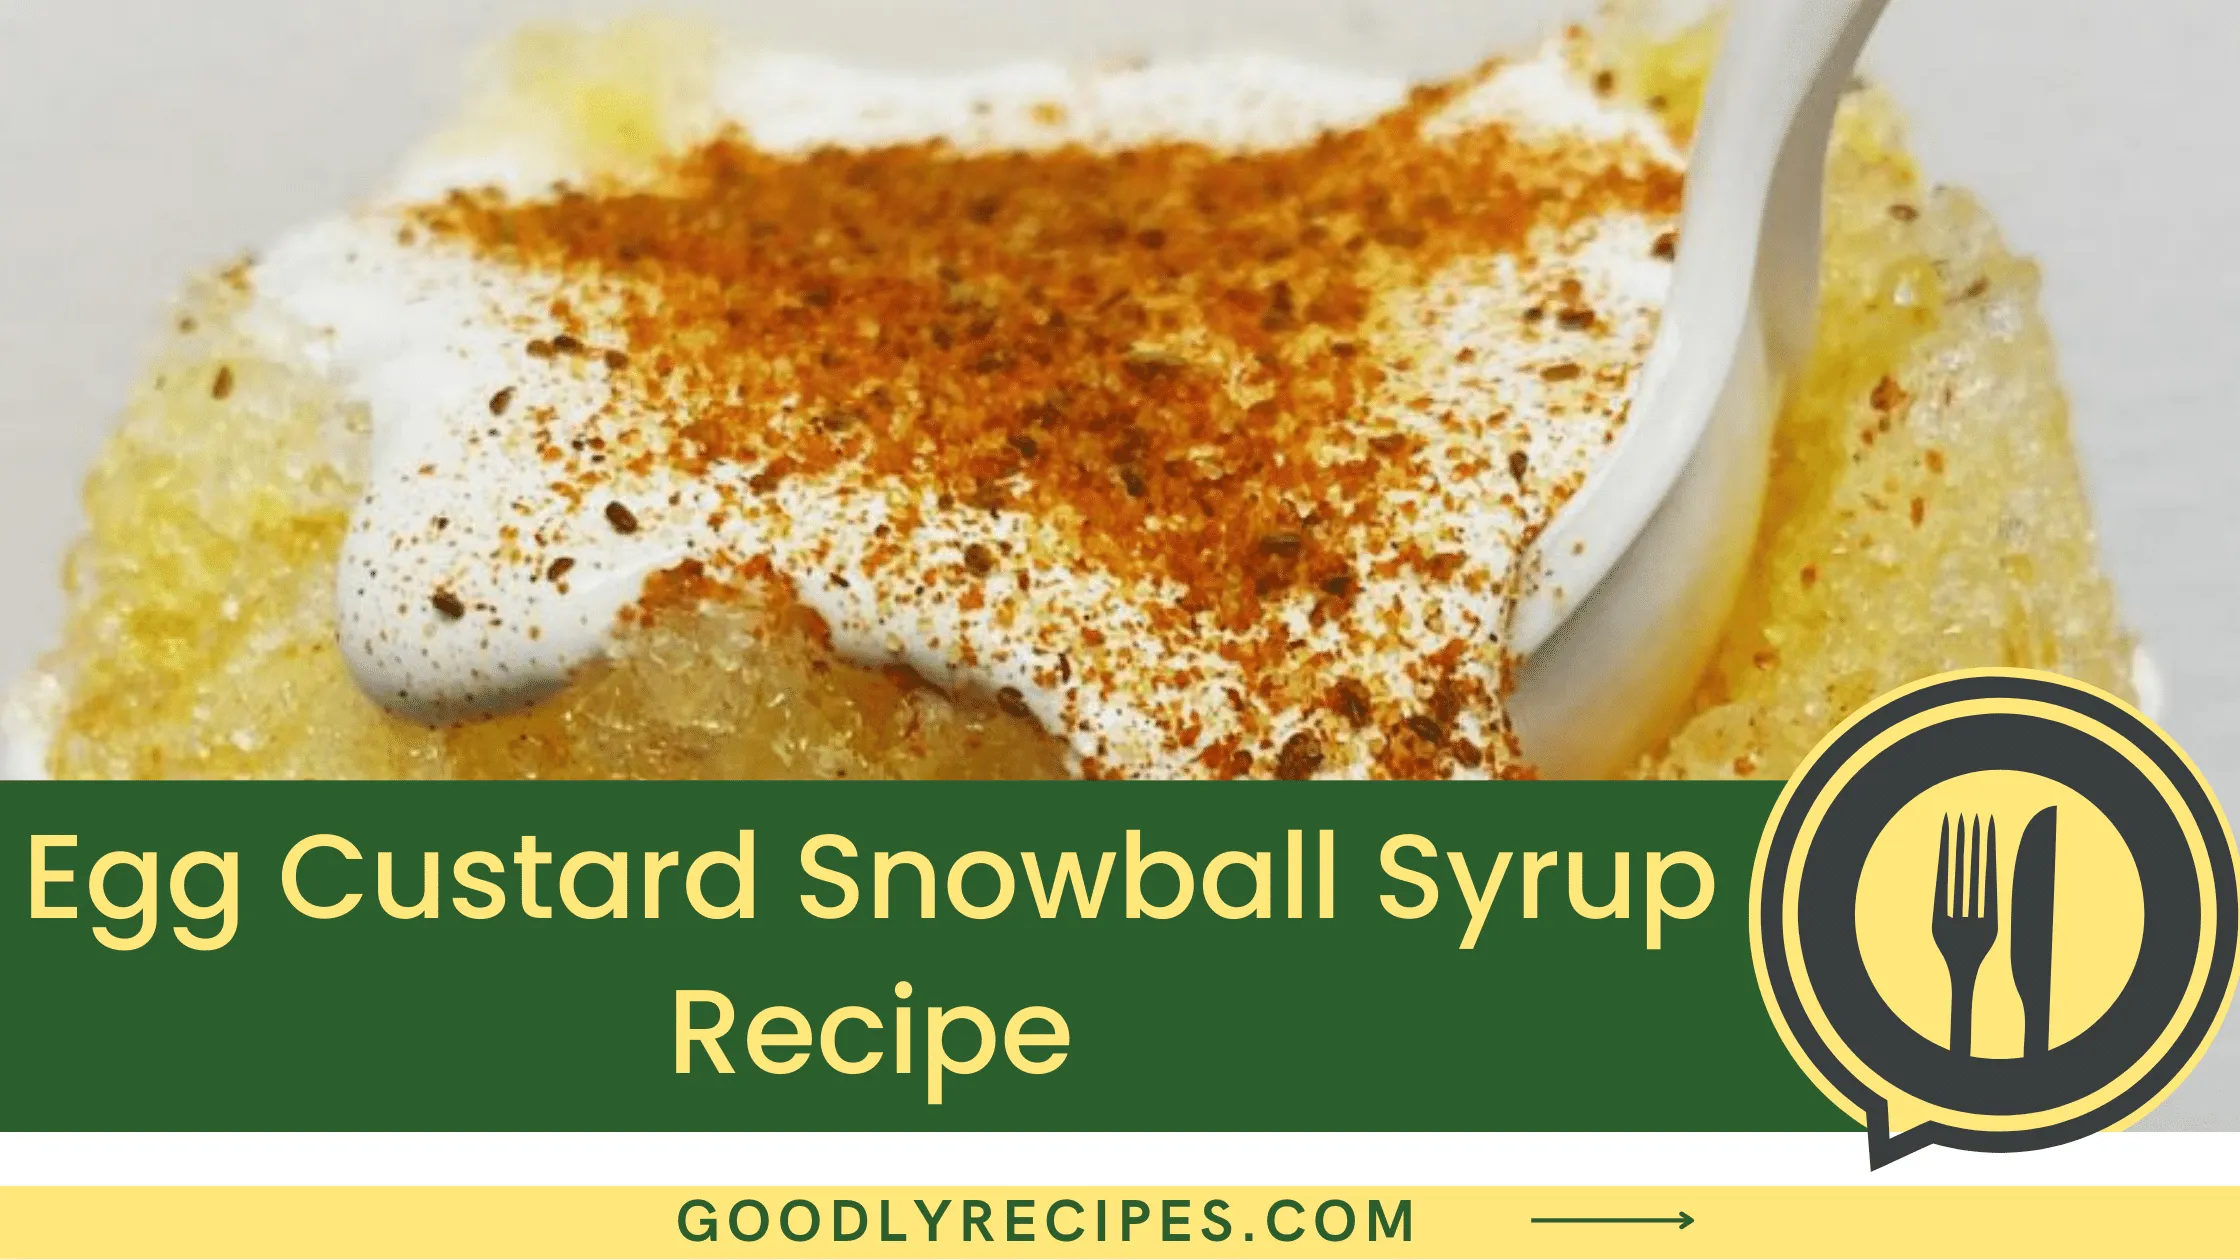 What is Egg Custard Snowball Syrup?